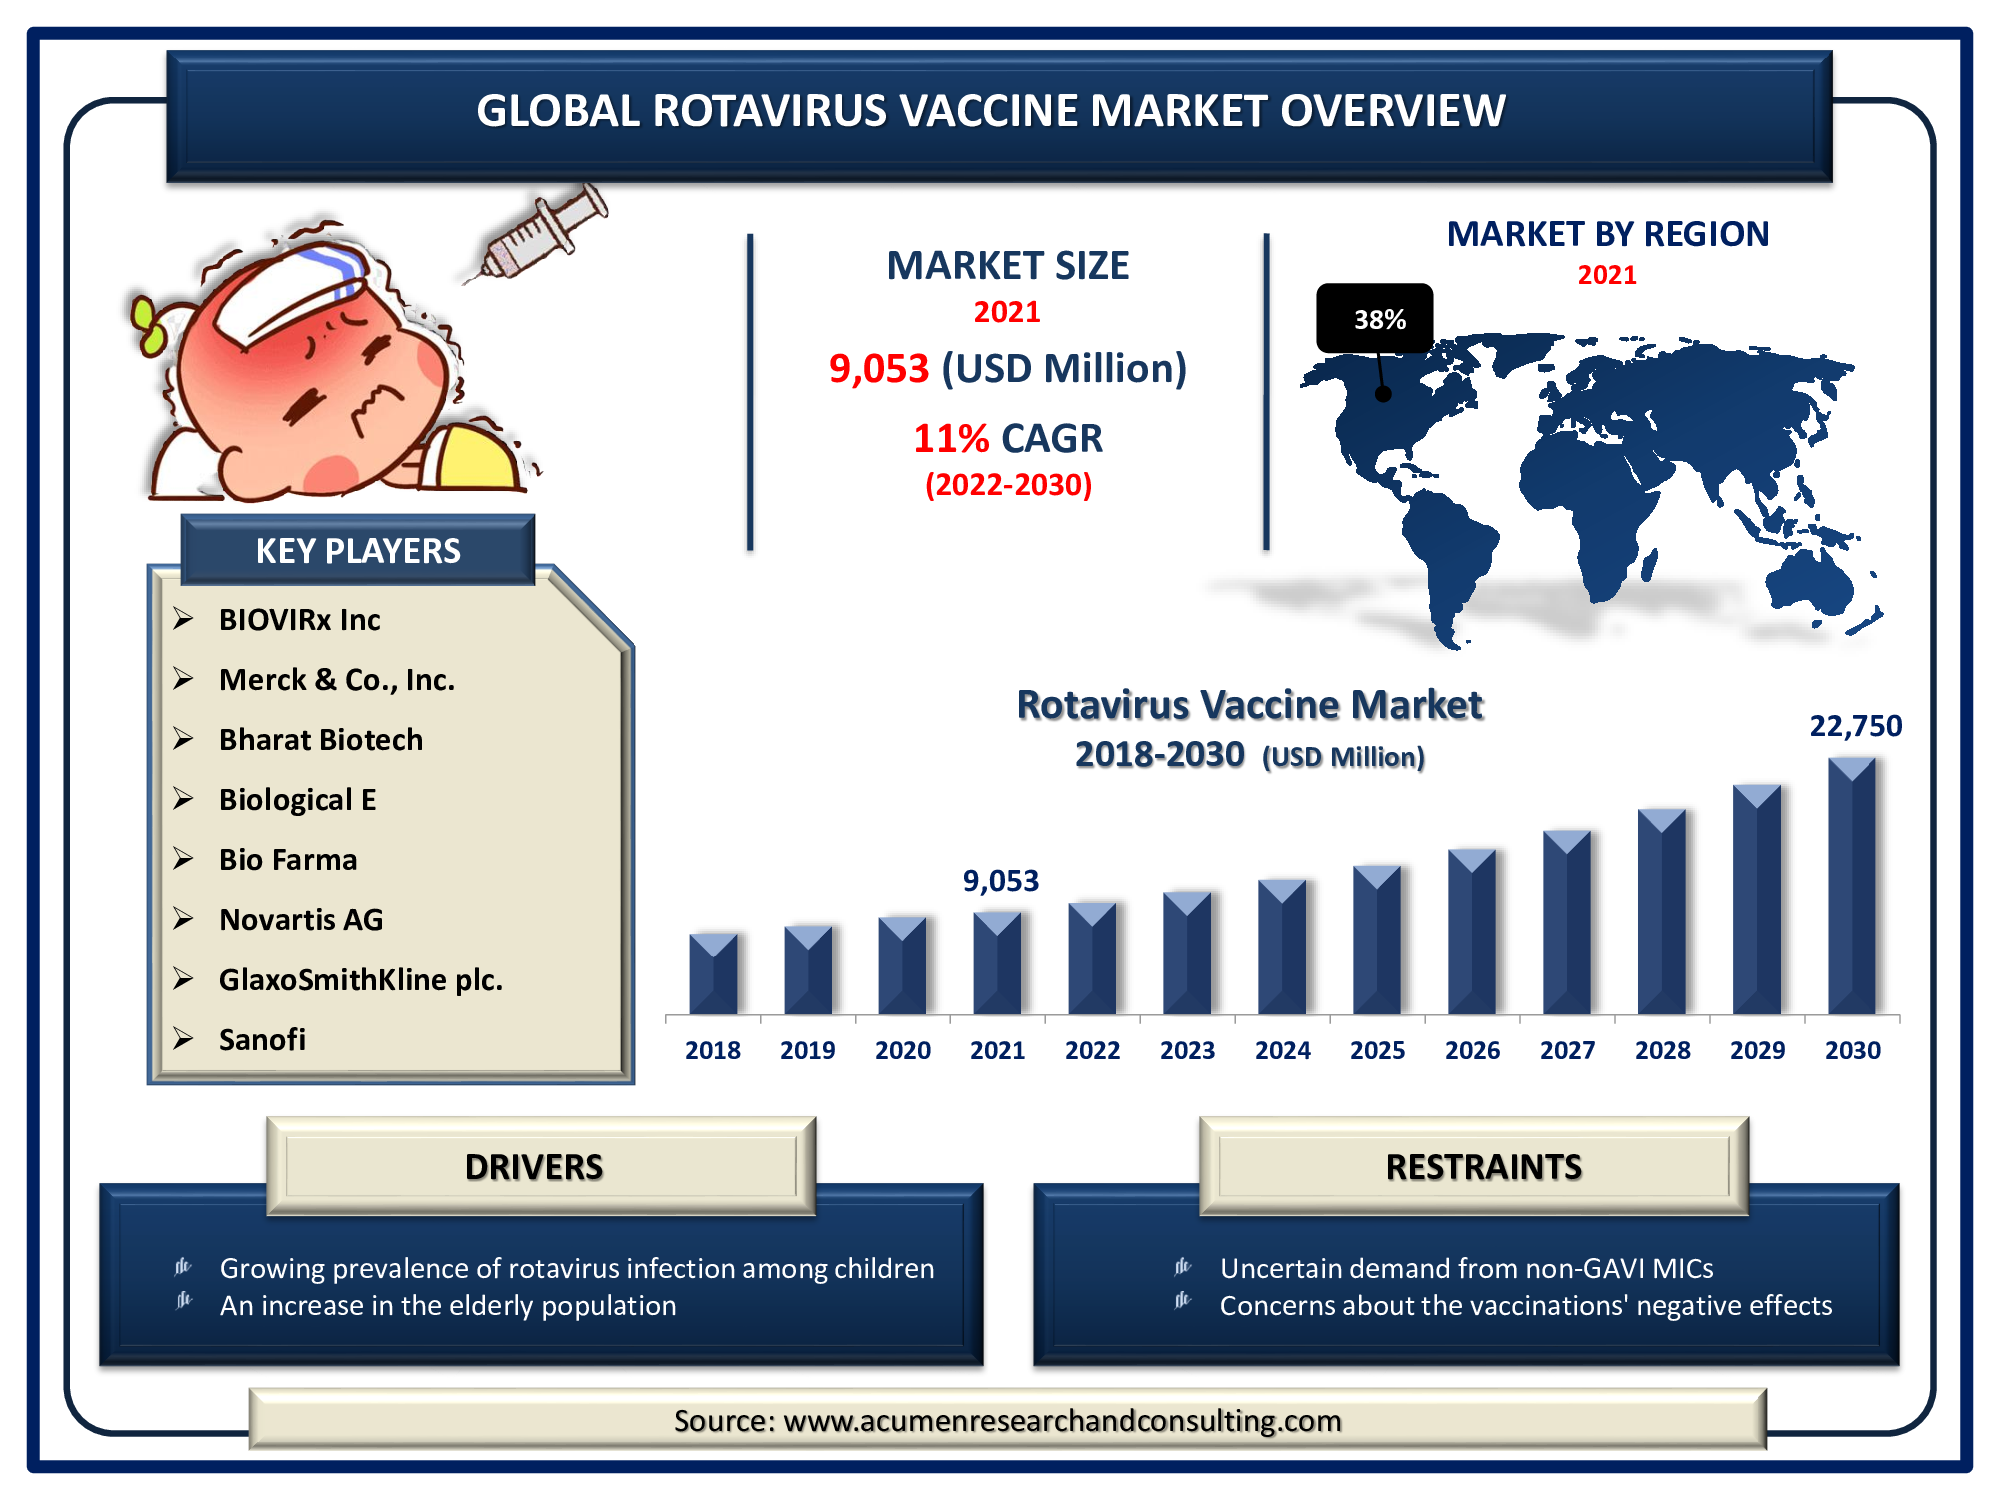 Rotavirus Vaccine Market is predicted to be worth USD 22,750 Million by 2030, with a CAGR of 11%